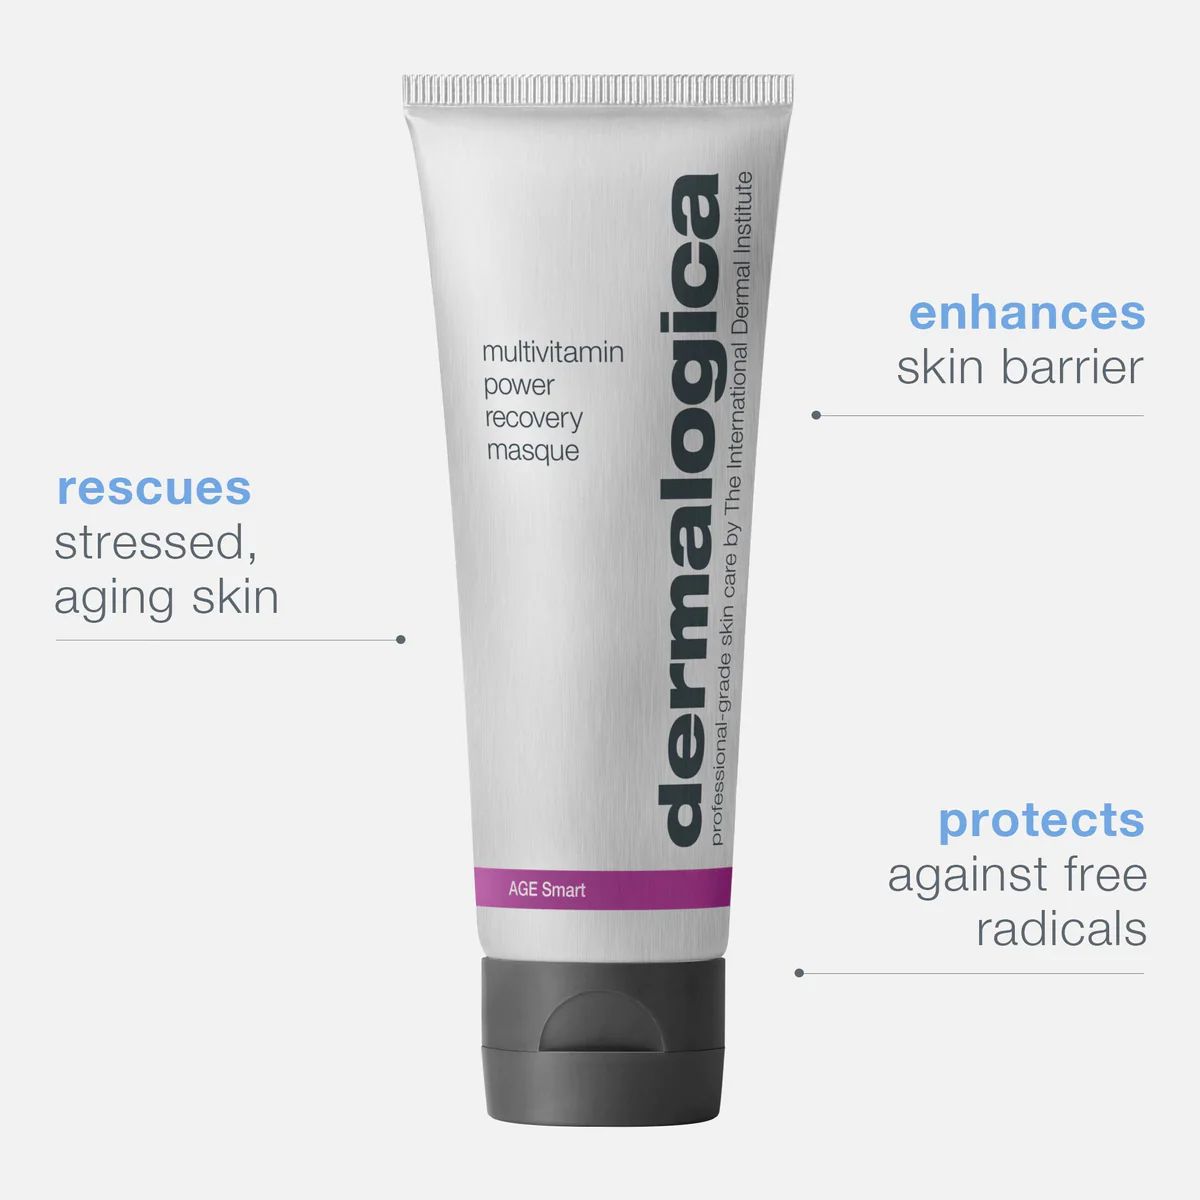 multivitamin power recovery mask | Dermalogica (US)